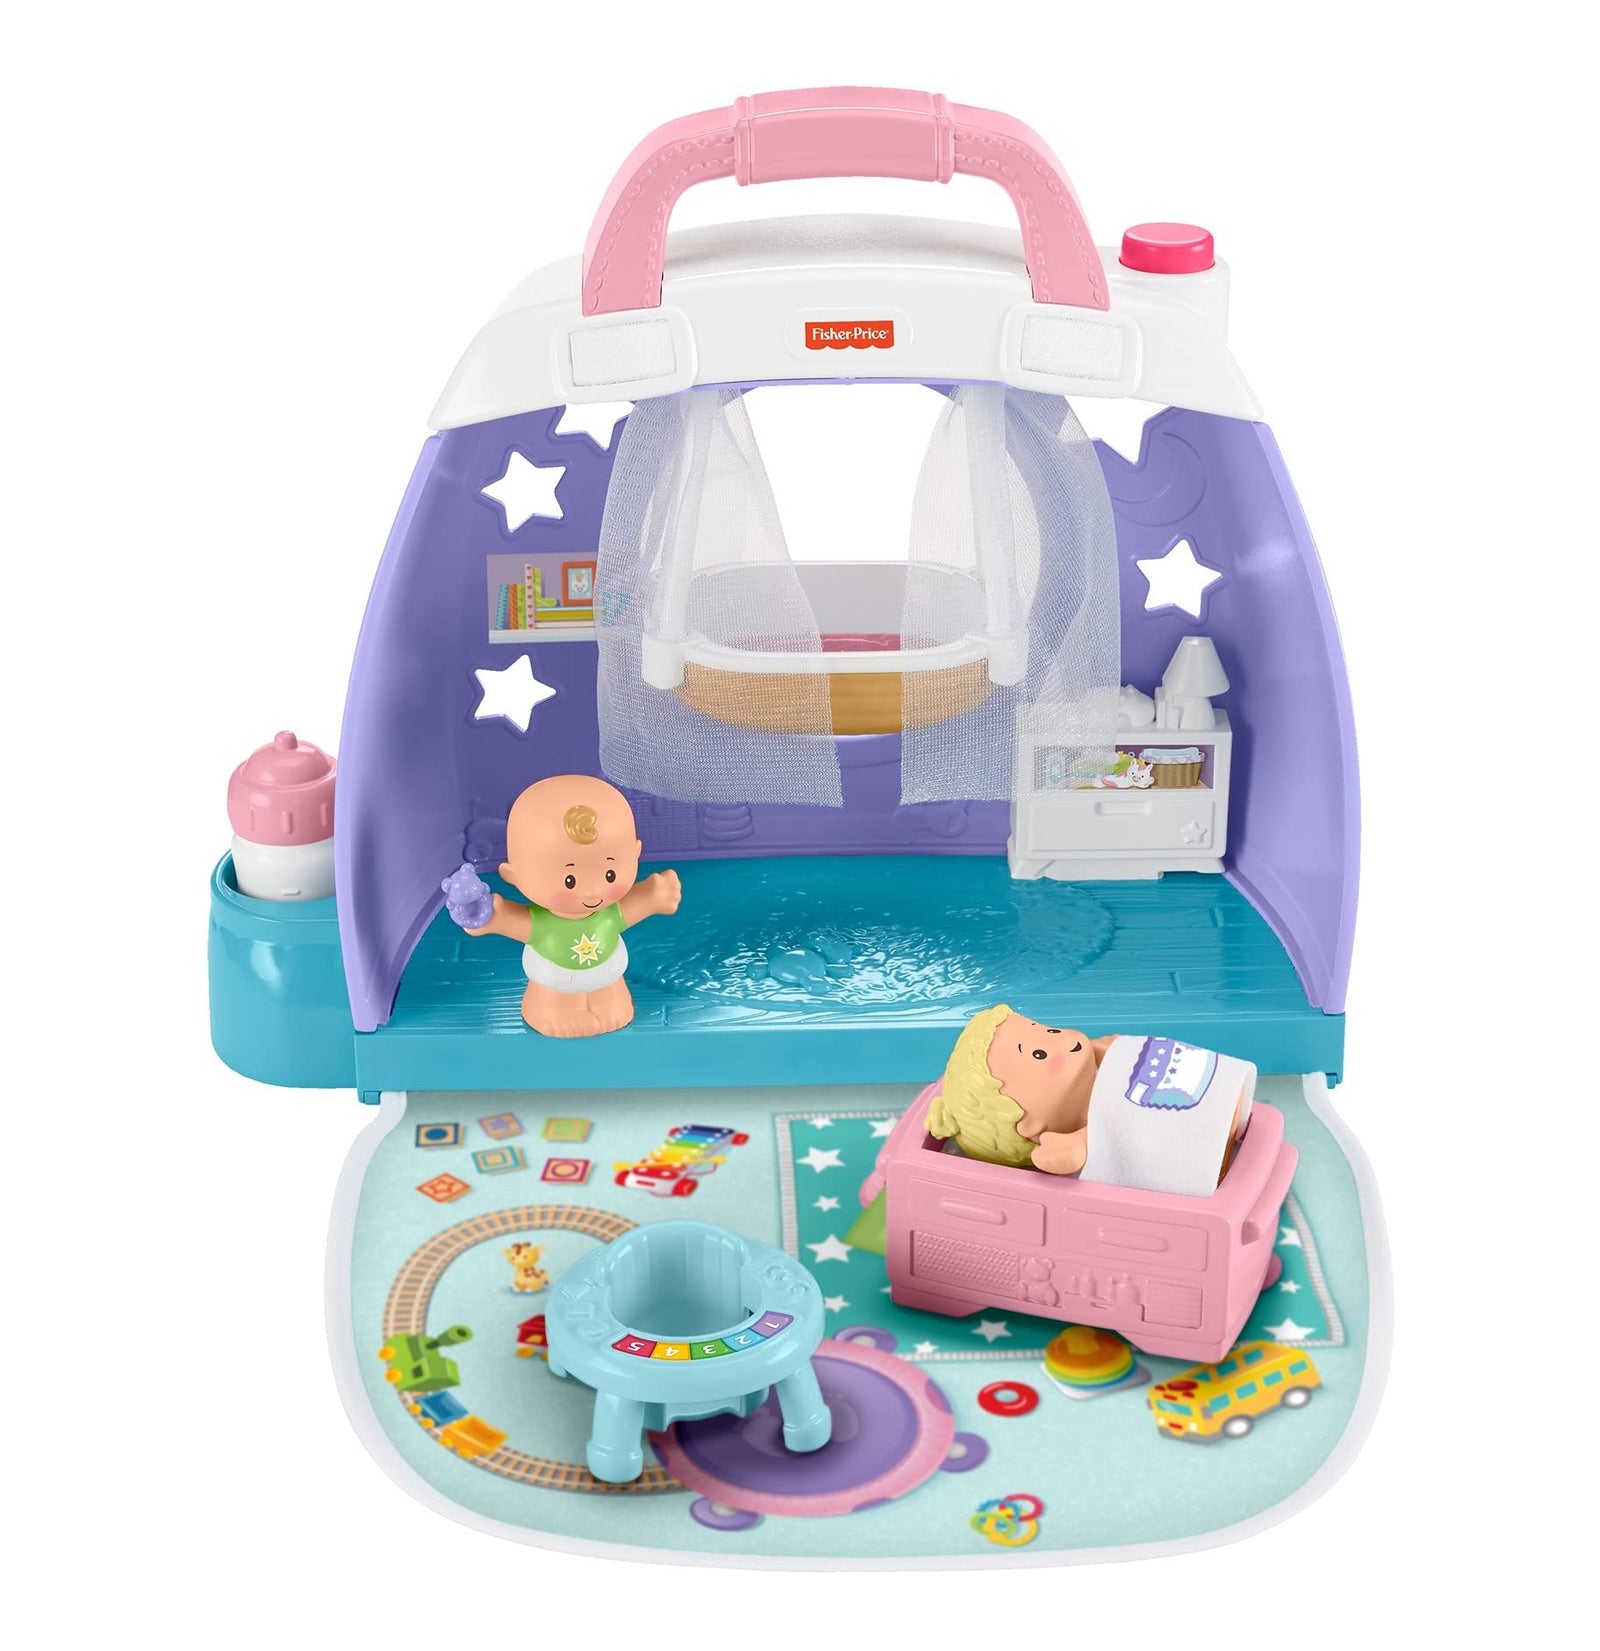 Fisher-Price Little People Cuddle & Play Nursery, Portable Nursery Play Set for Toddlers and Preschool Kids Up to Age 5